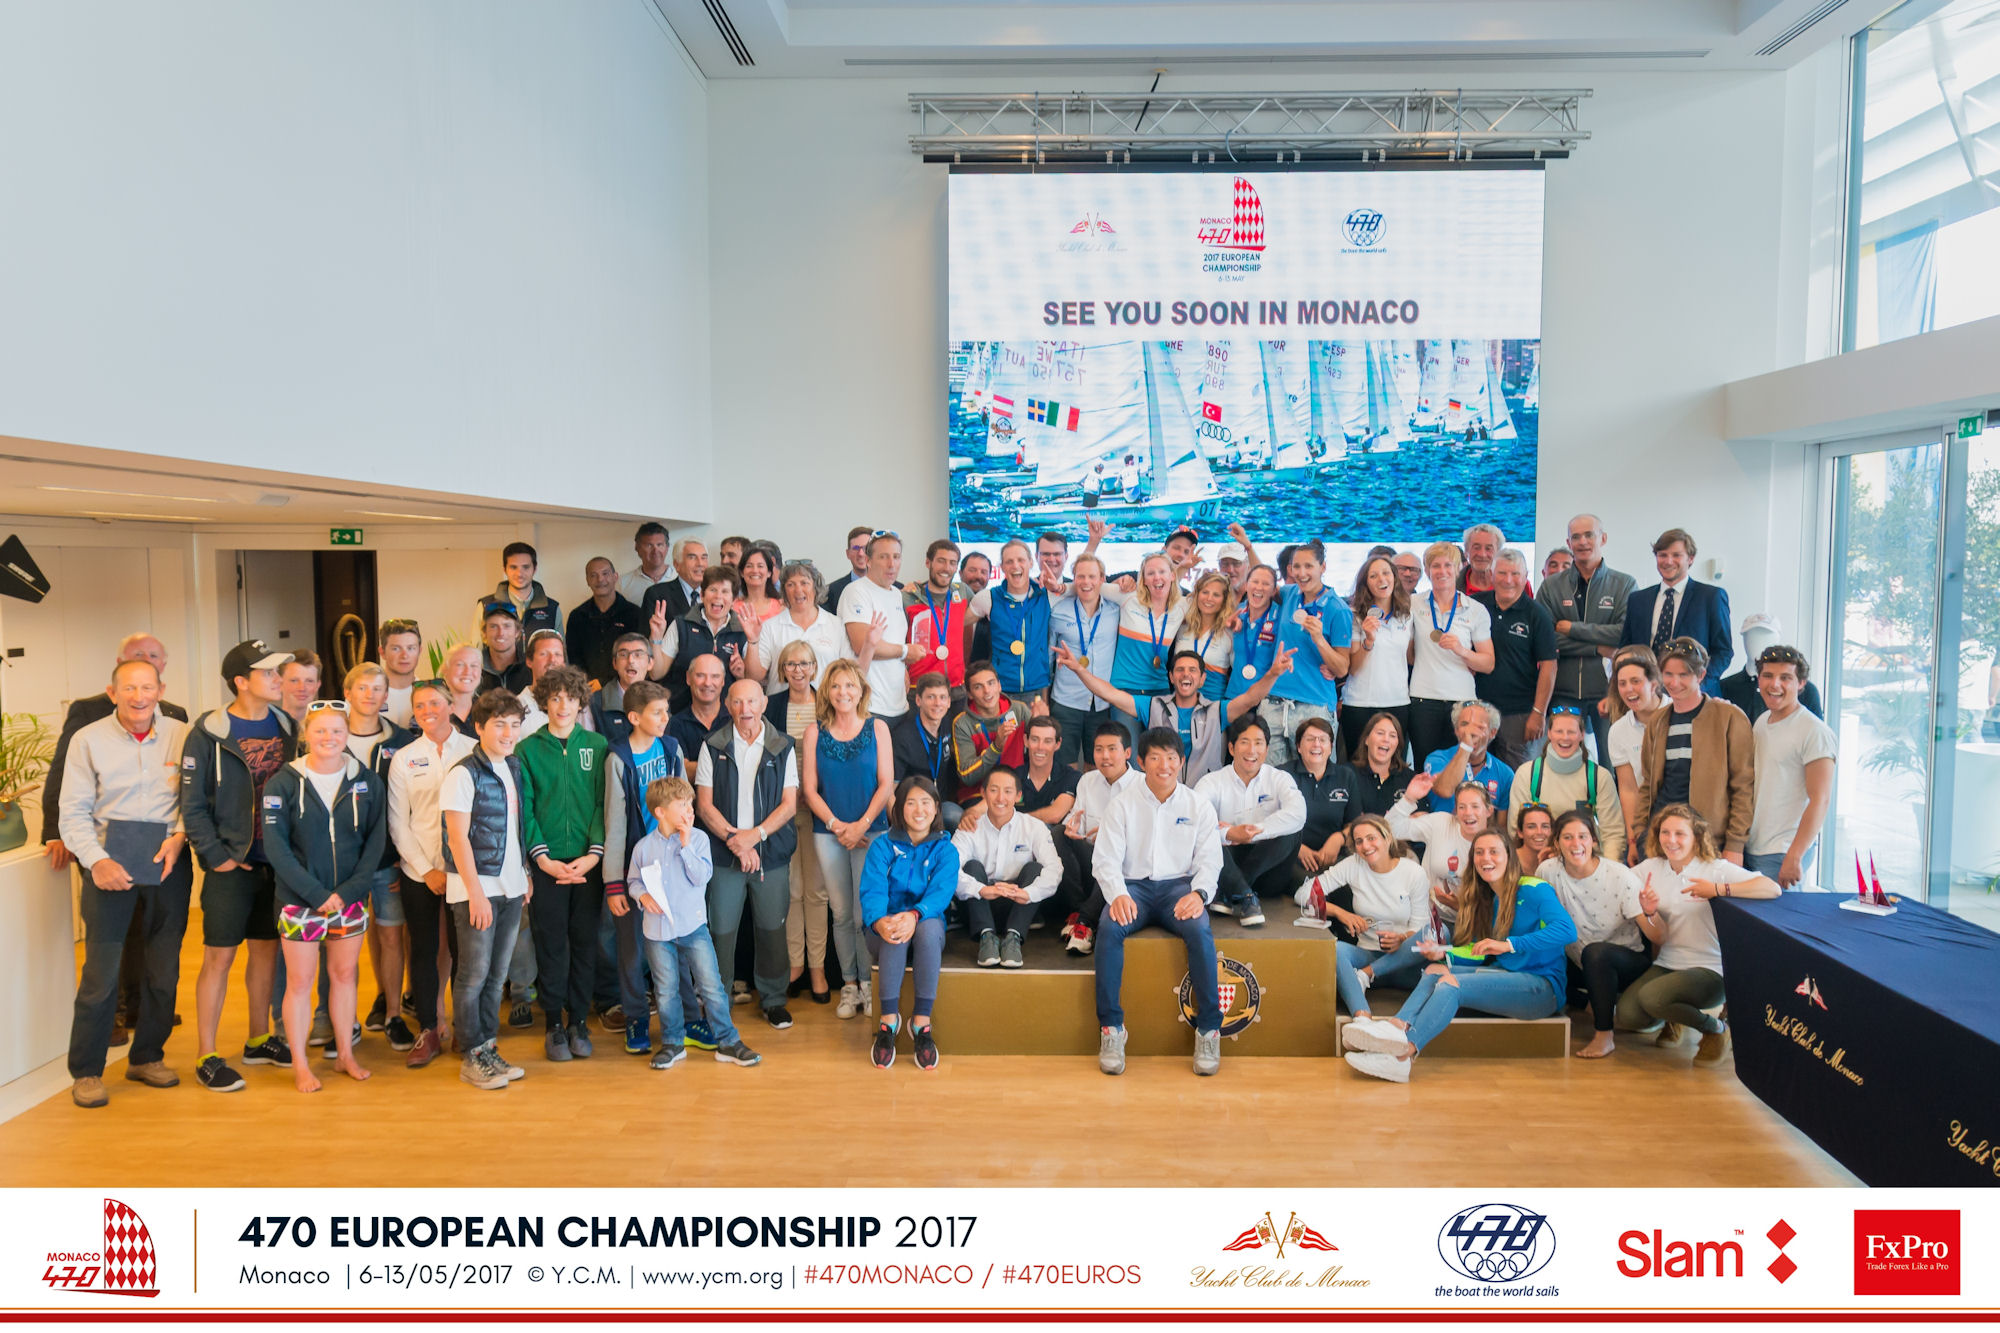 Sailors, coaches and event organisers